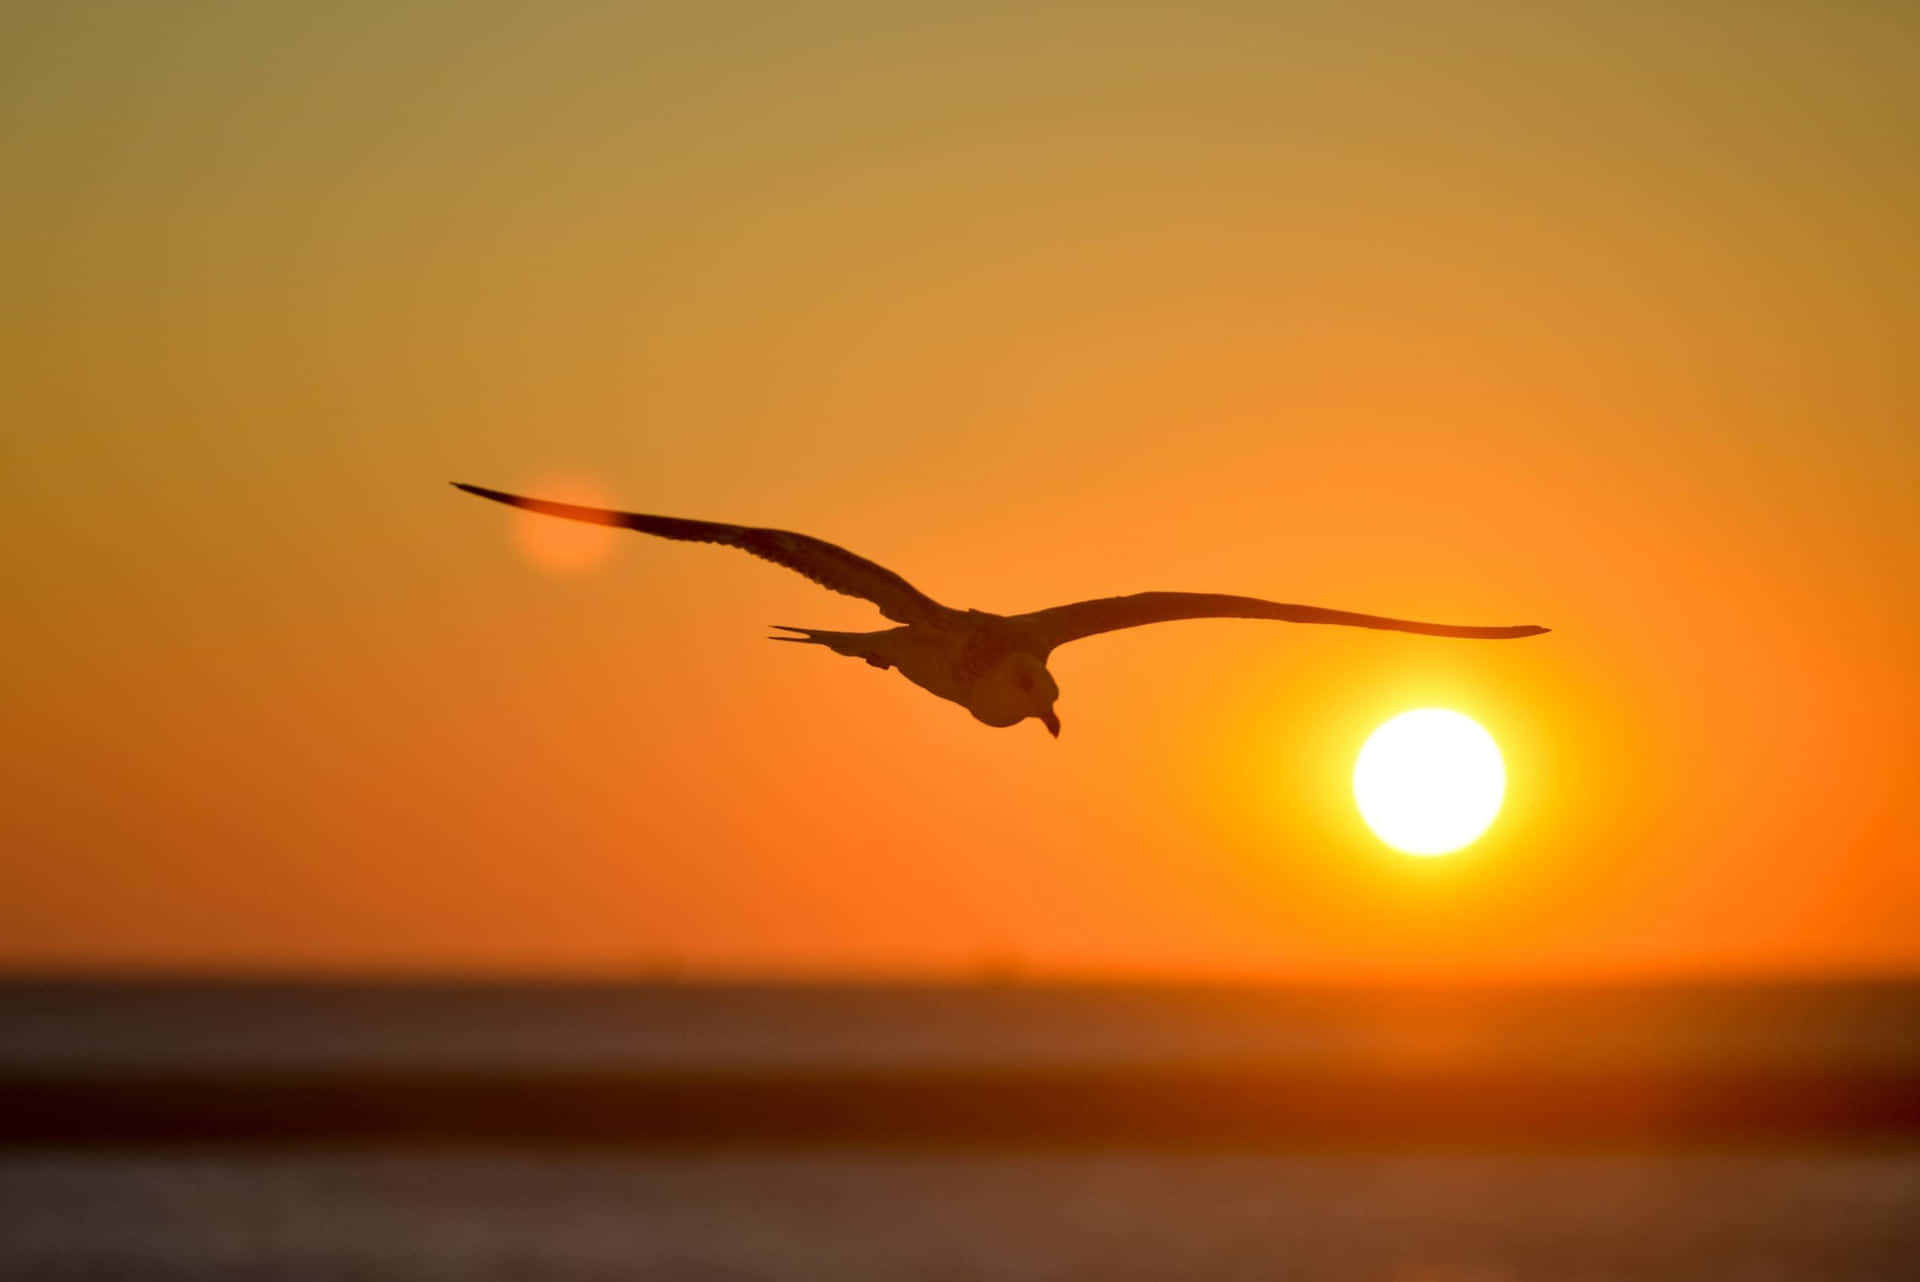 Majestic Seagull Soaring Over the Ocean Wallpaper